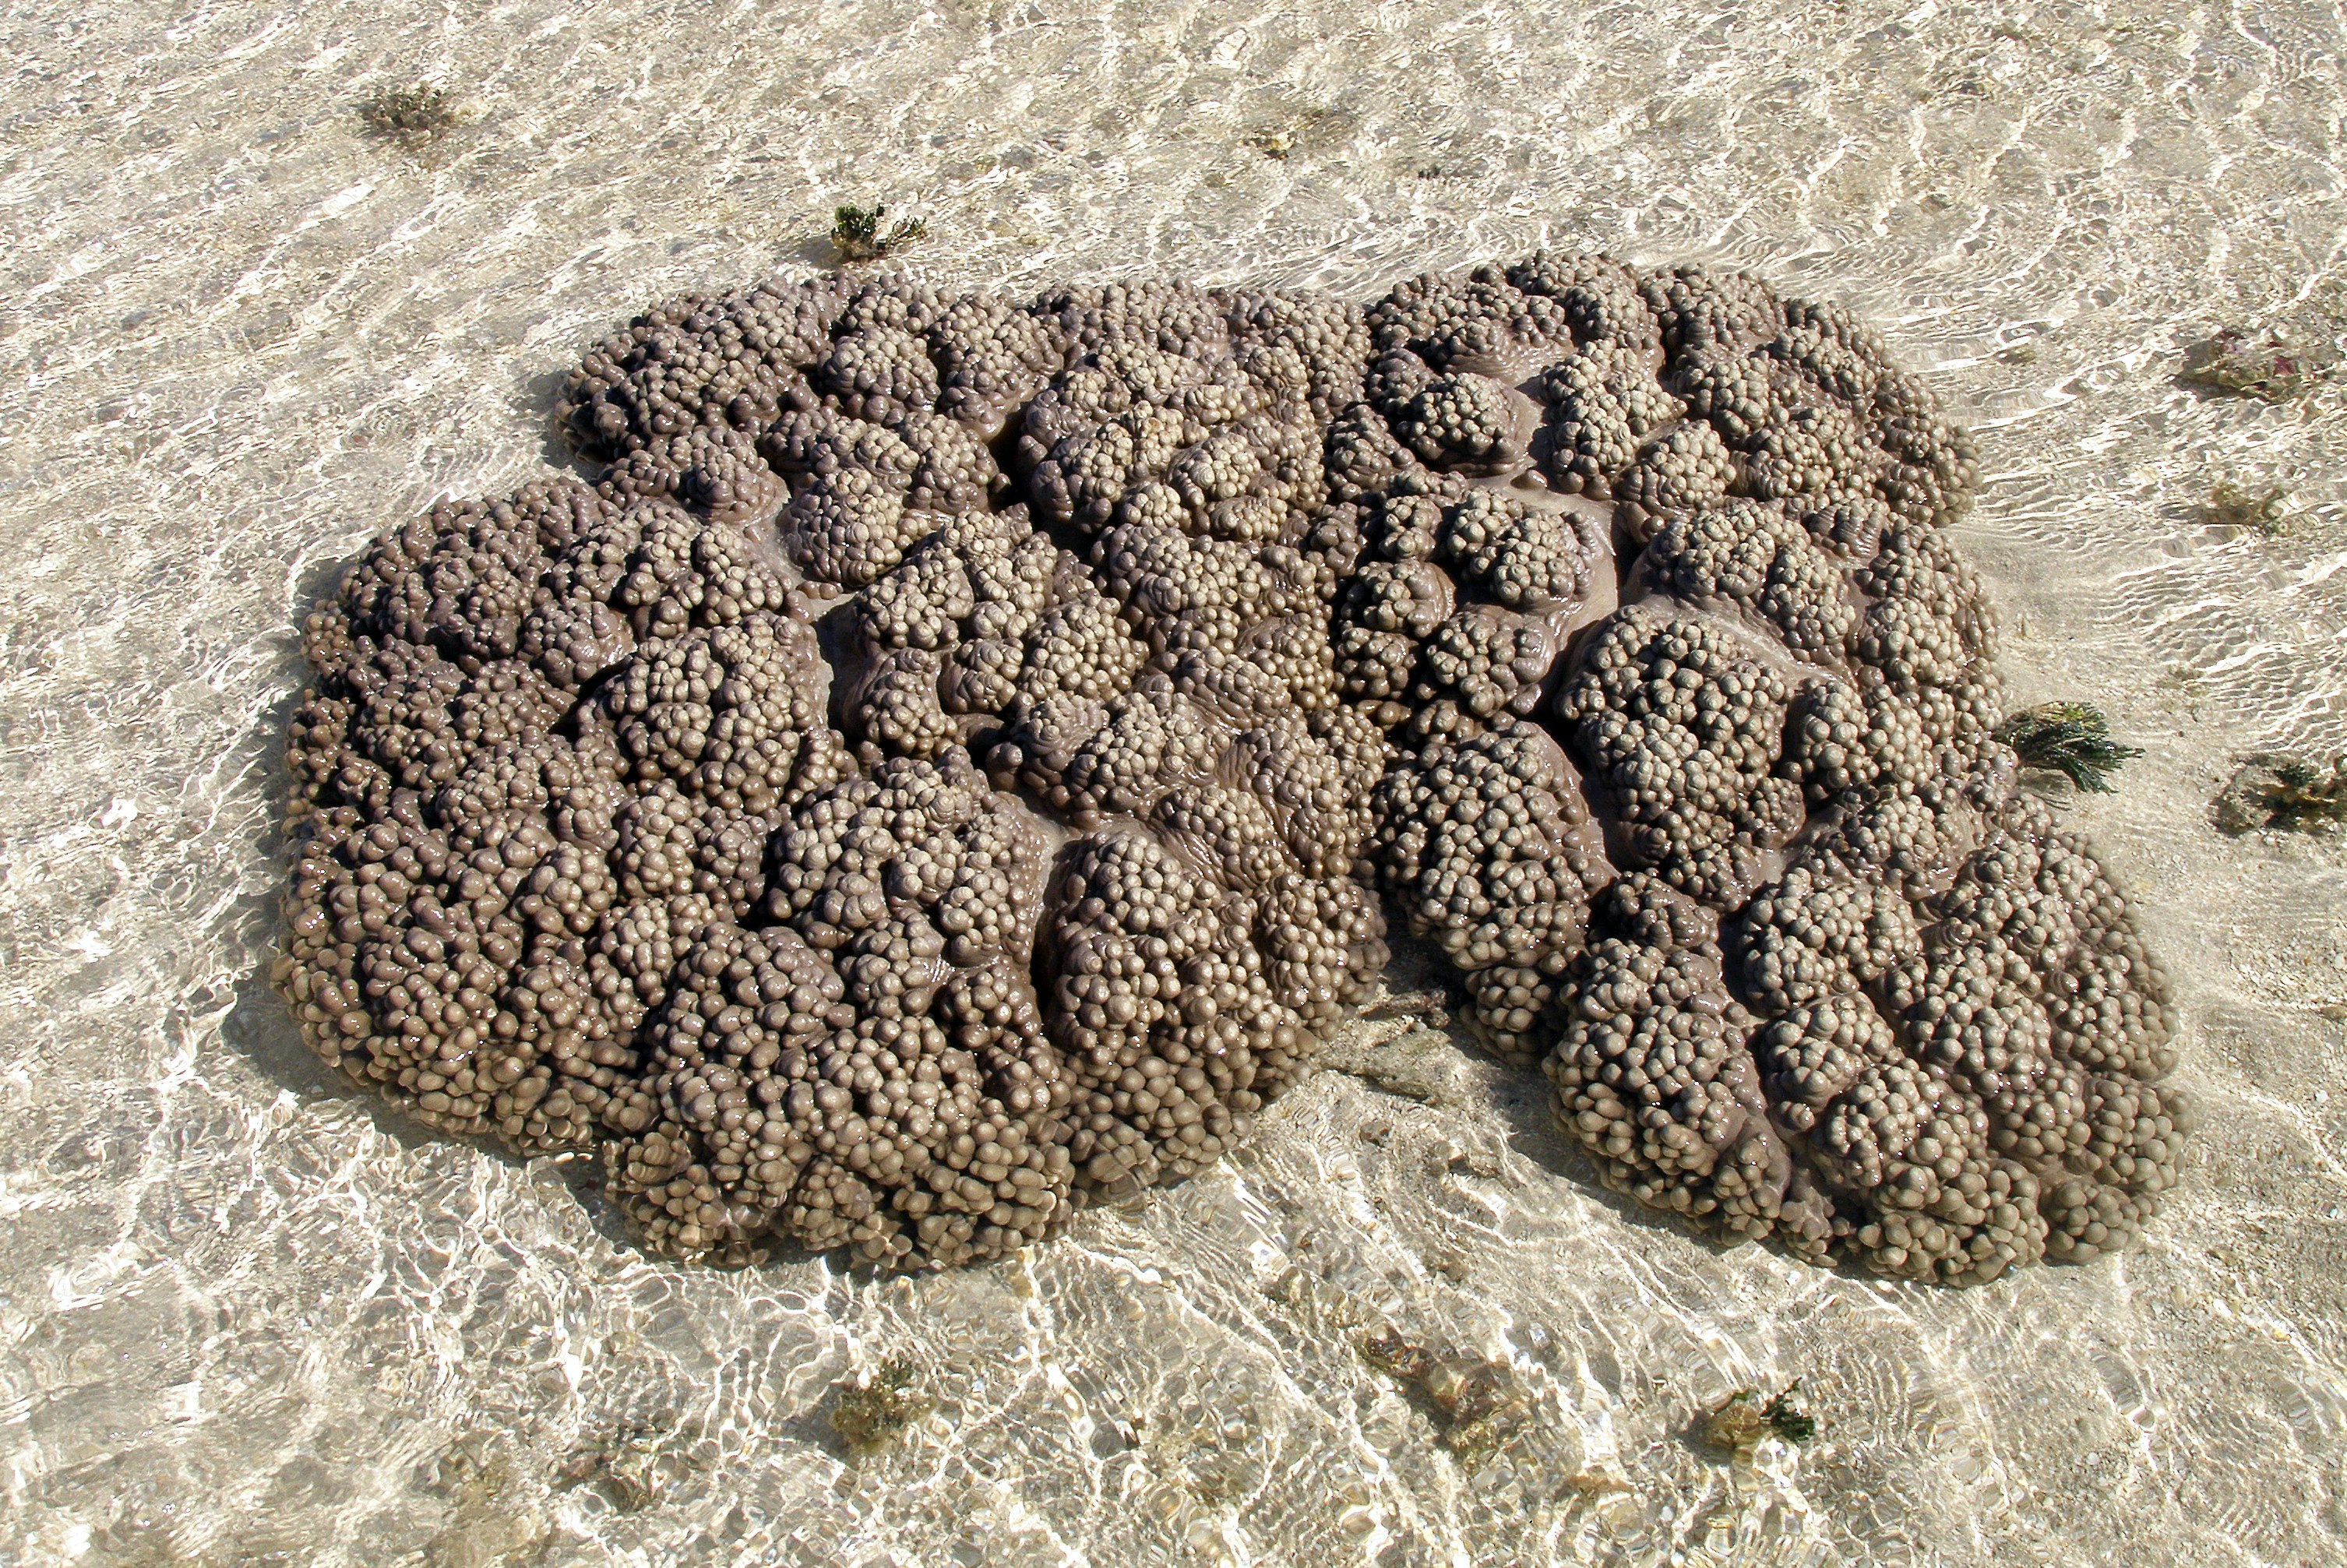 A photo from years ago of a coral exposed during an unusually low tide at Green Island on the Great Barrier Reef.